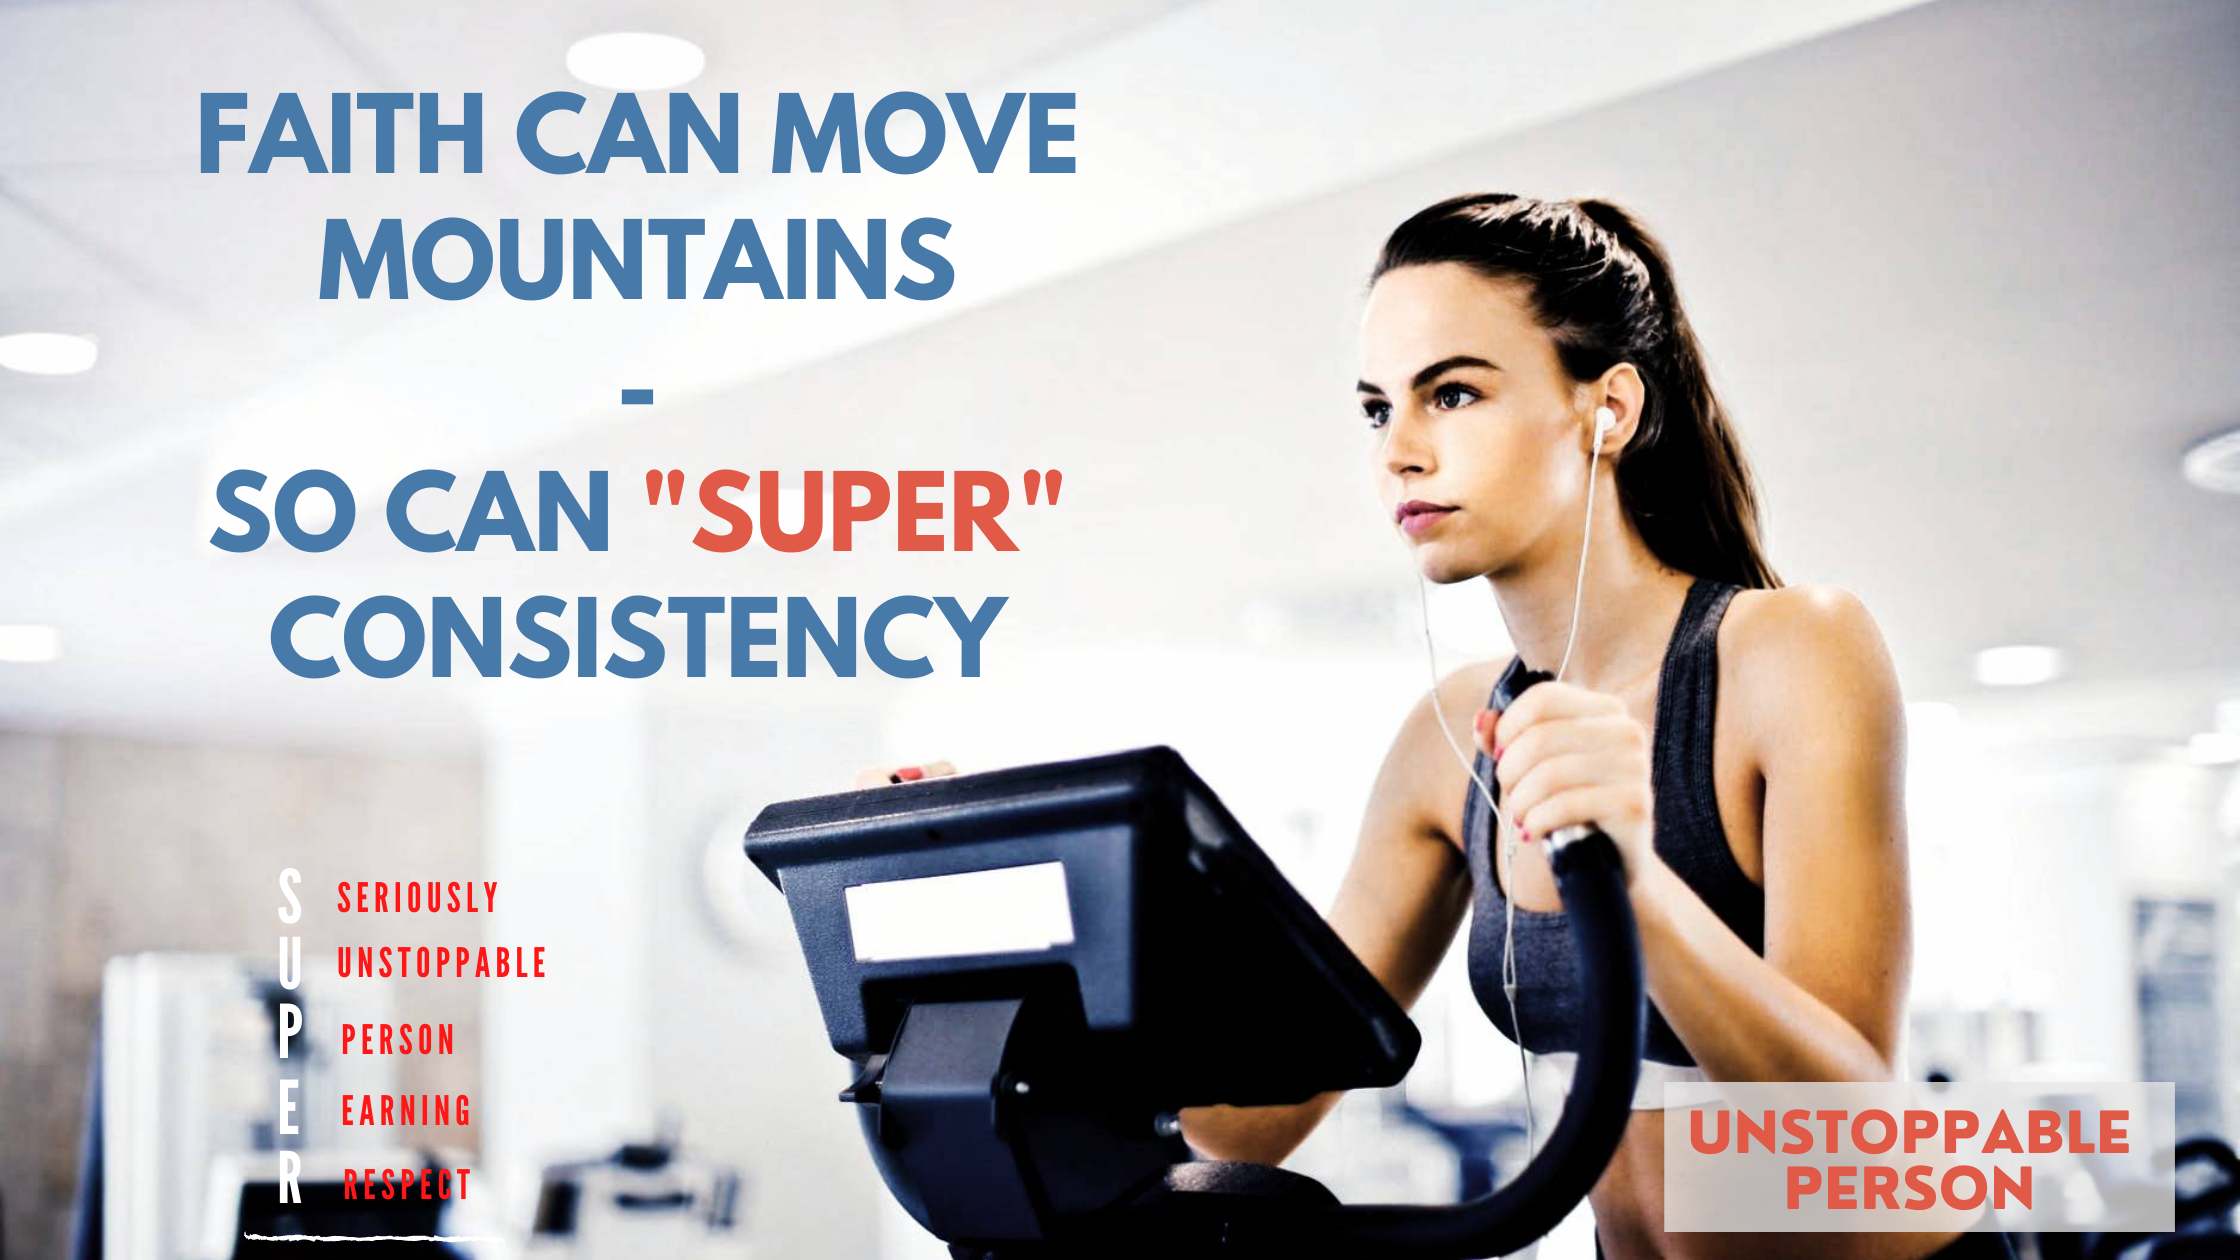 Consistency Moves Mountains